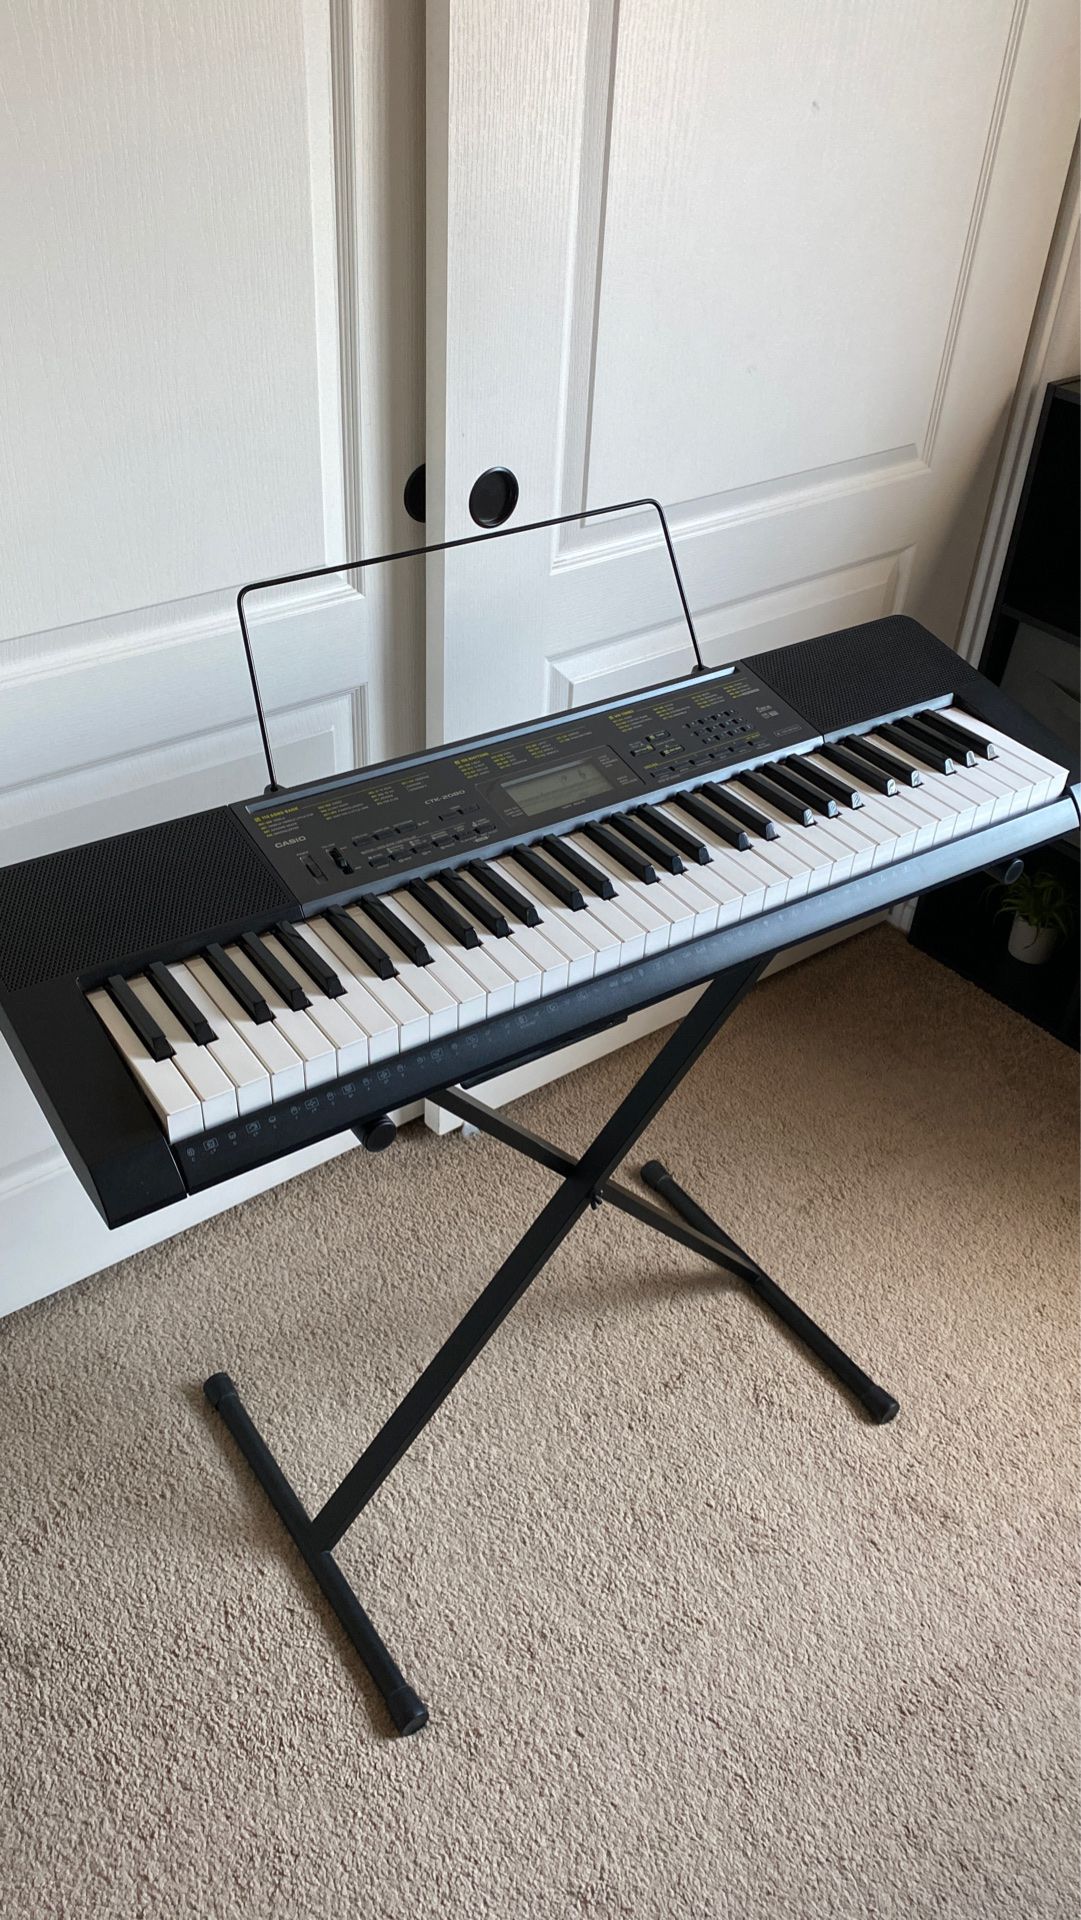 Casio Keyboard Piano with stand